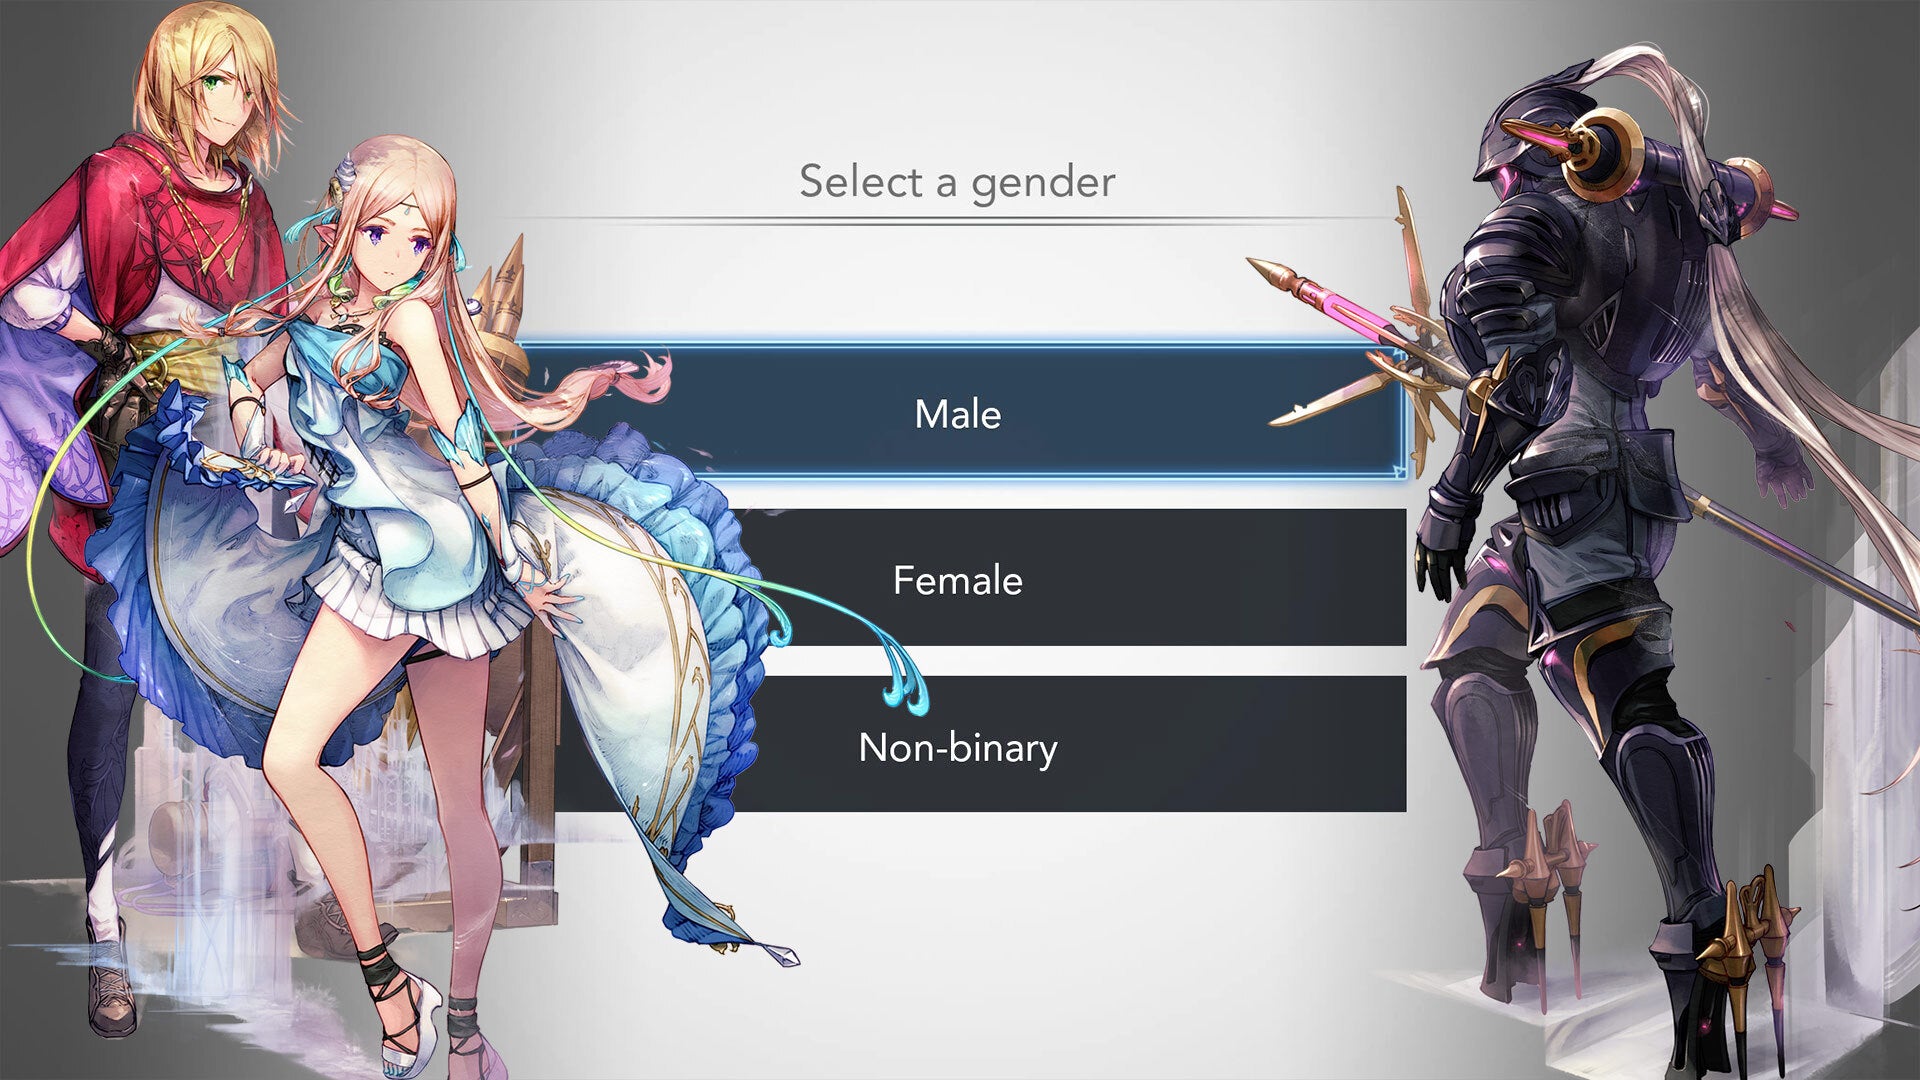 Rule 63: Games site reimages male protagonists as non-sexualised